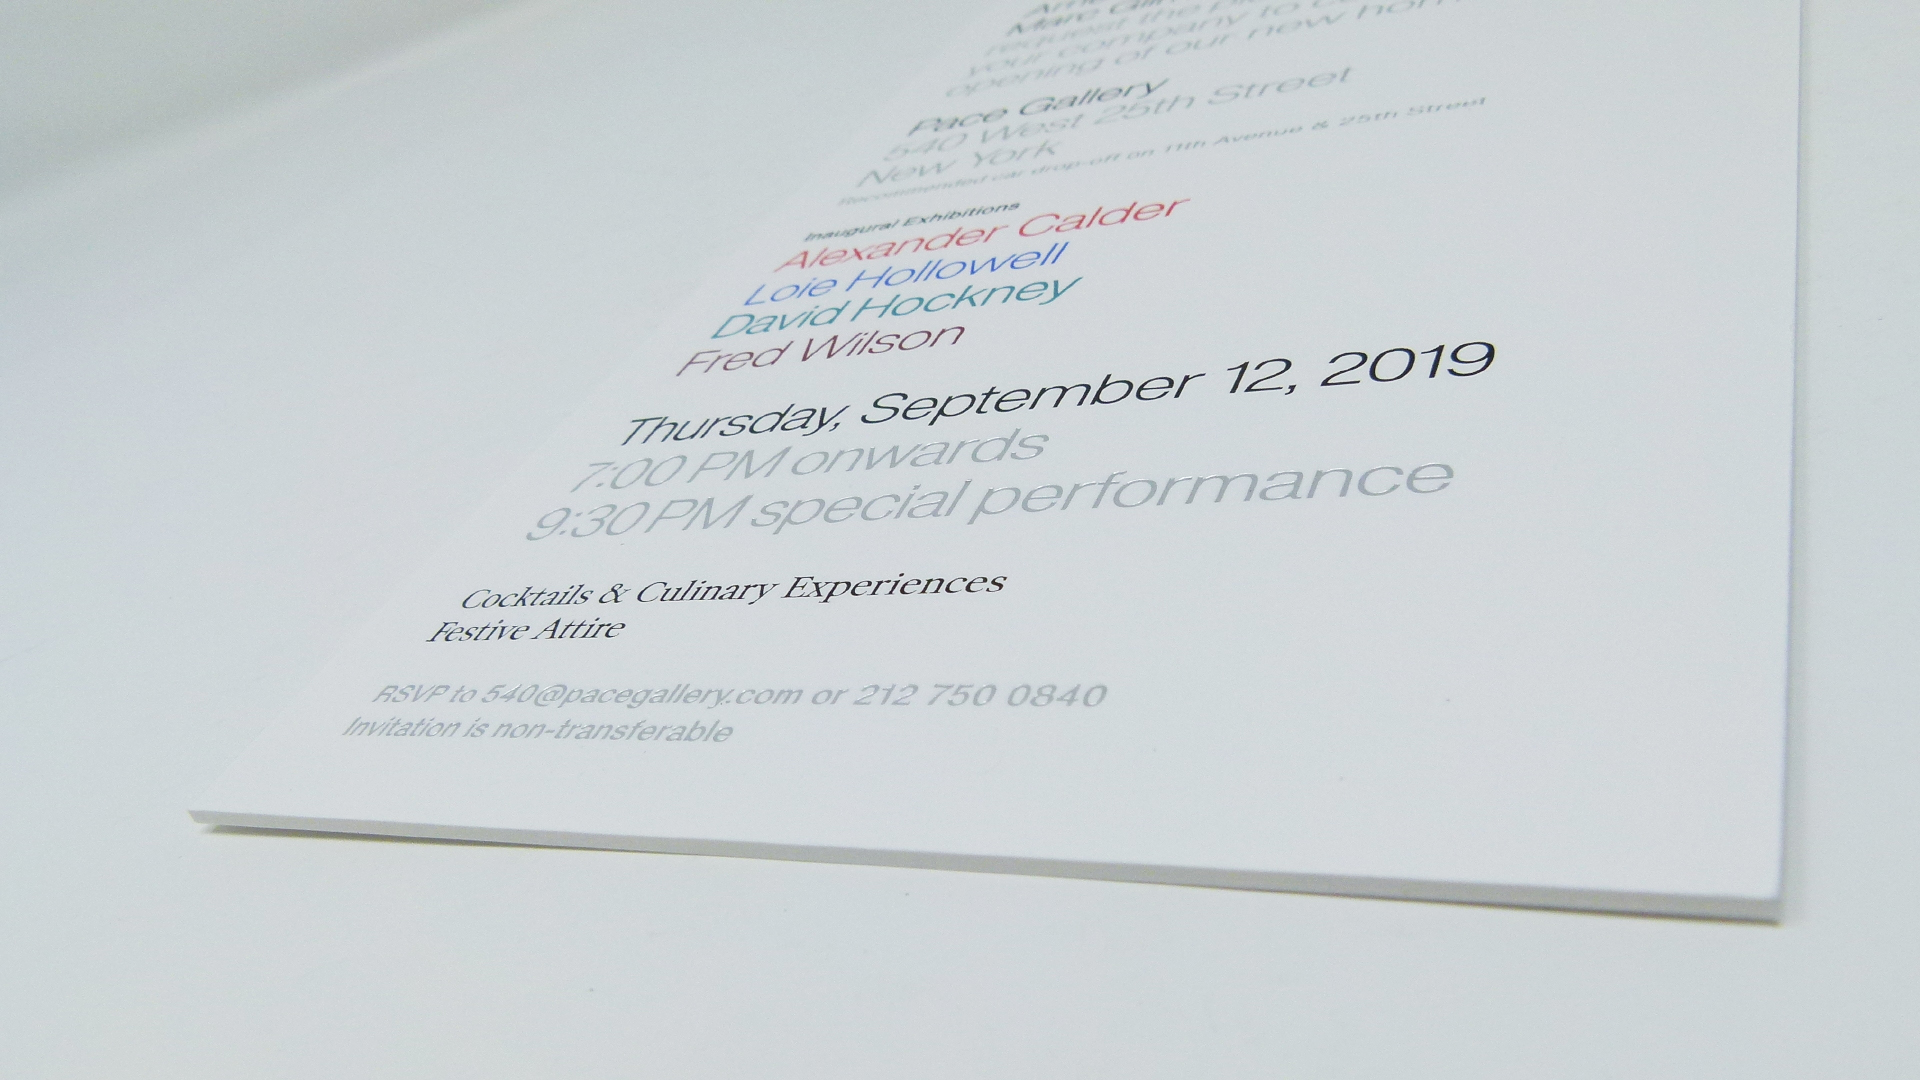 Animated Pace Gallery Invitation by DataGraphic - PaperSpecs